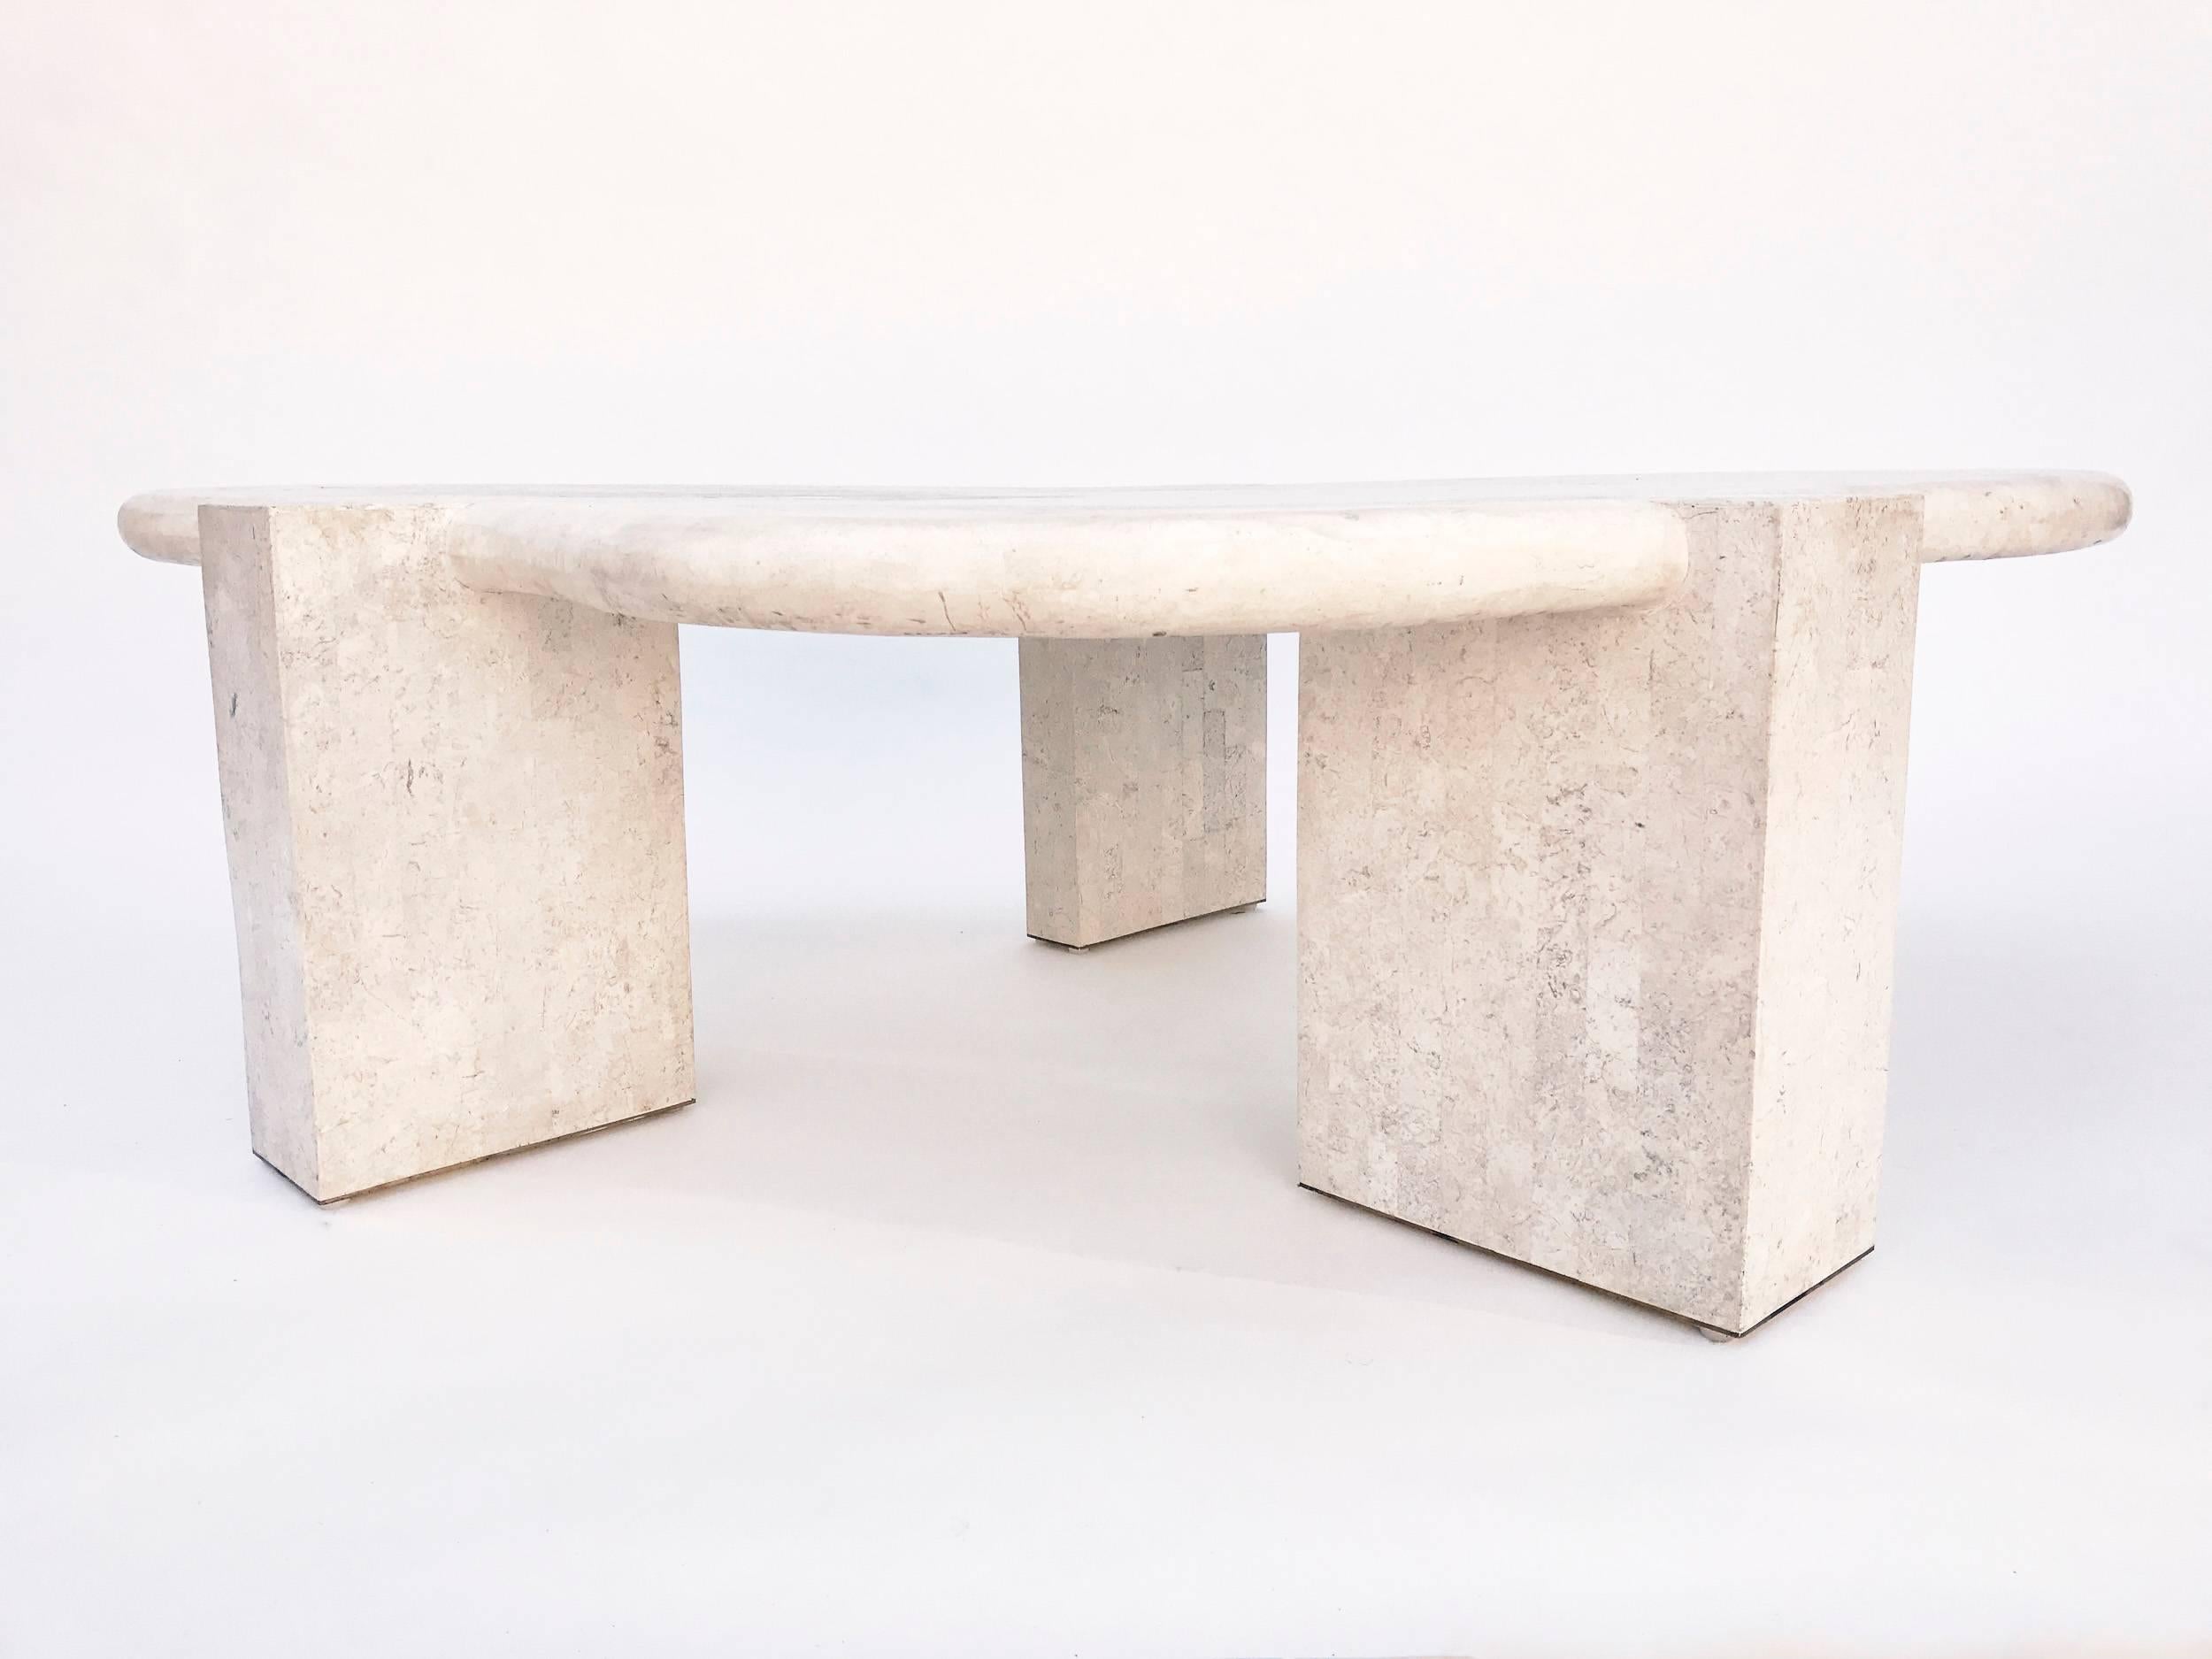 Tessellated stone biomorphic coffee or cocktail table by Maitland Smith, from the 1970s. Fine tilework in fossilized stone covers the top of this biomorphically shaped coffee table. Three rectilinear modernist legs in contrasting tessellated pattern